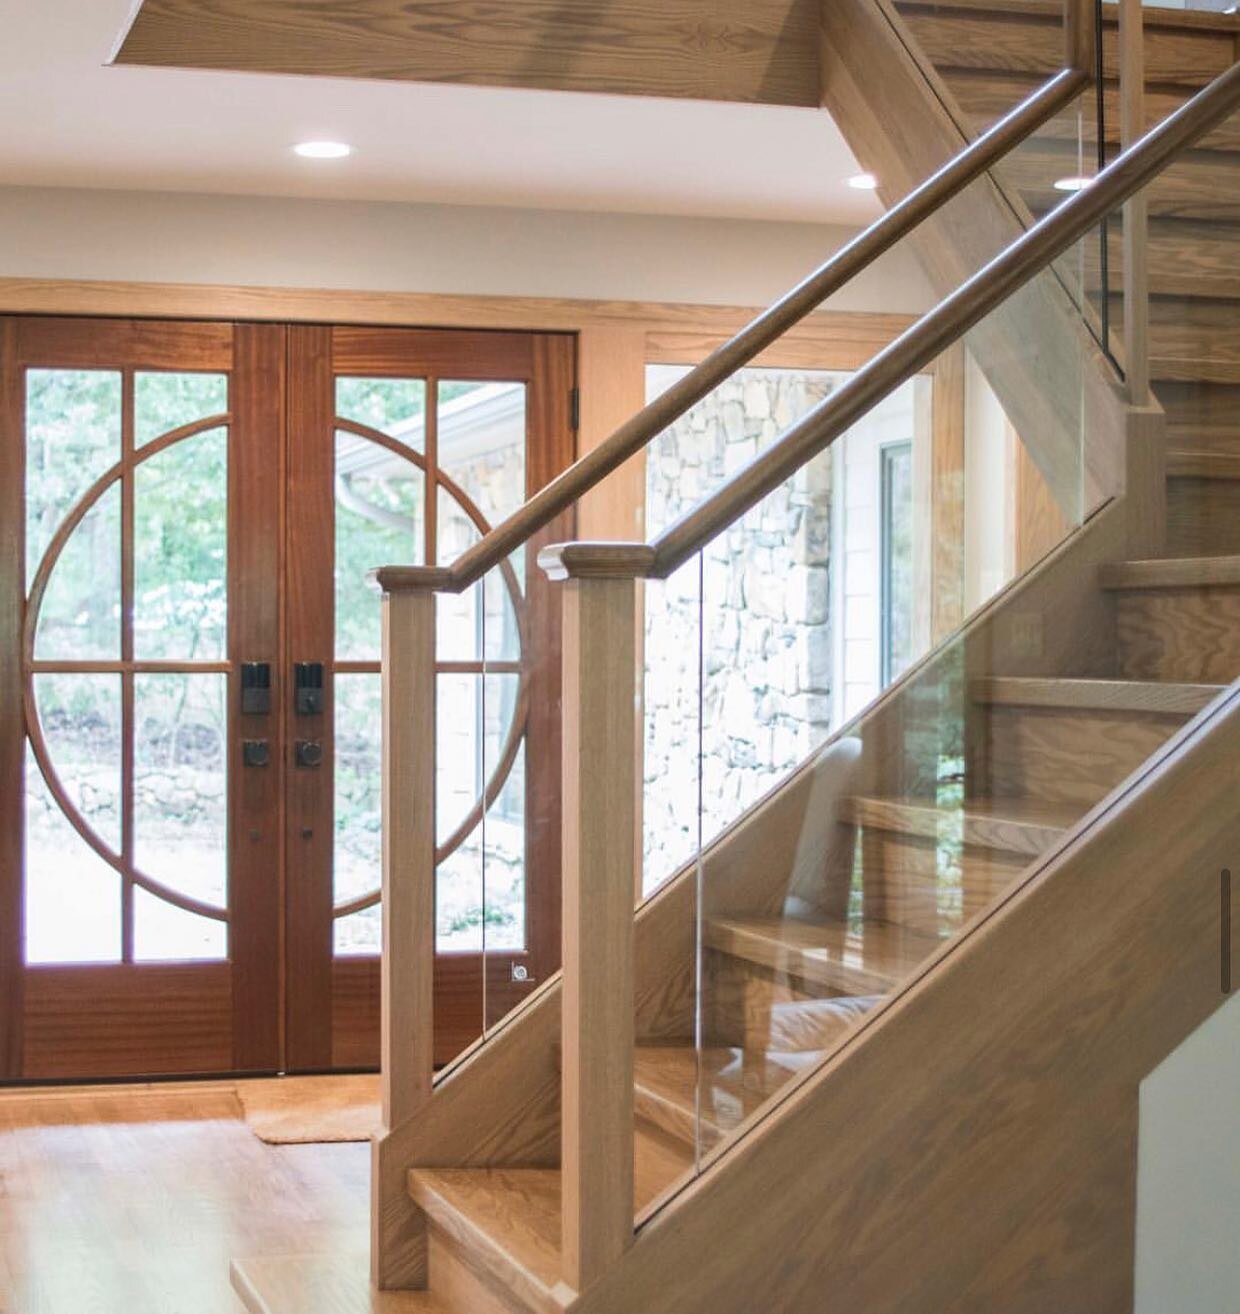 Sharing more details of this mid-century modern #chapelhill renovation on our feed. This home is filled with custom details to meet the style and vision of our client, like this @dallasmillworkinc new Sapele front door with Baldwin hardware, and red 